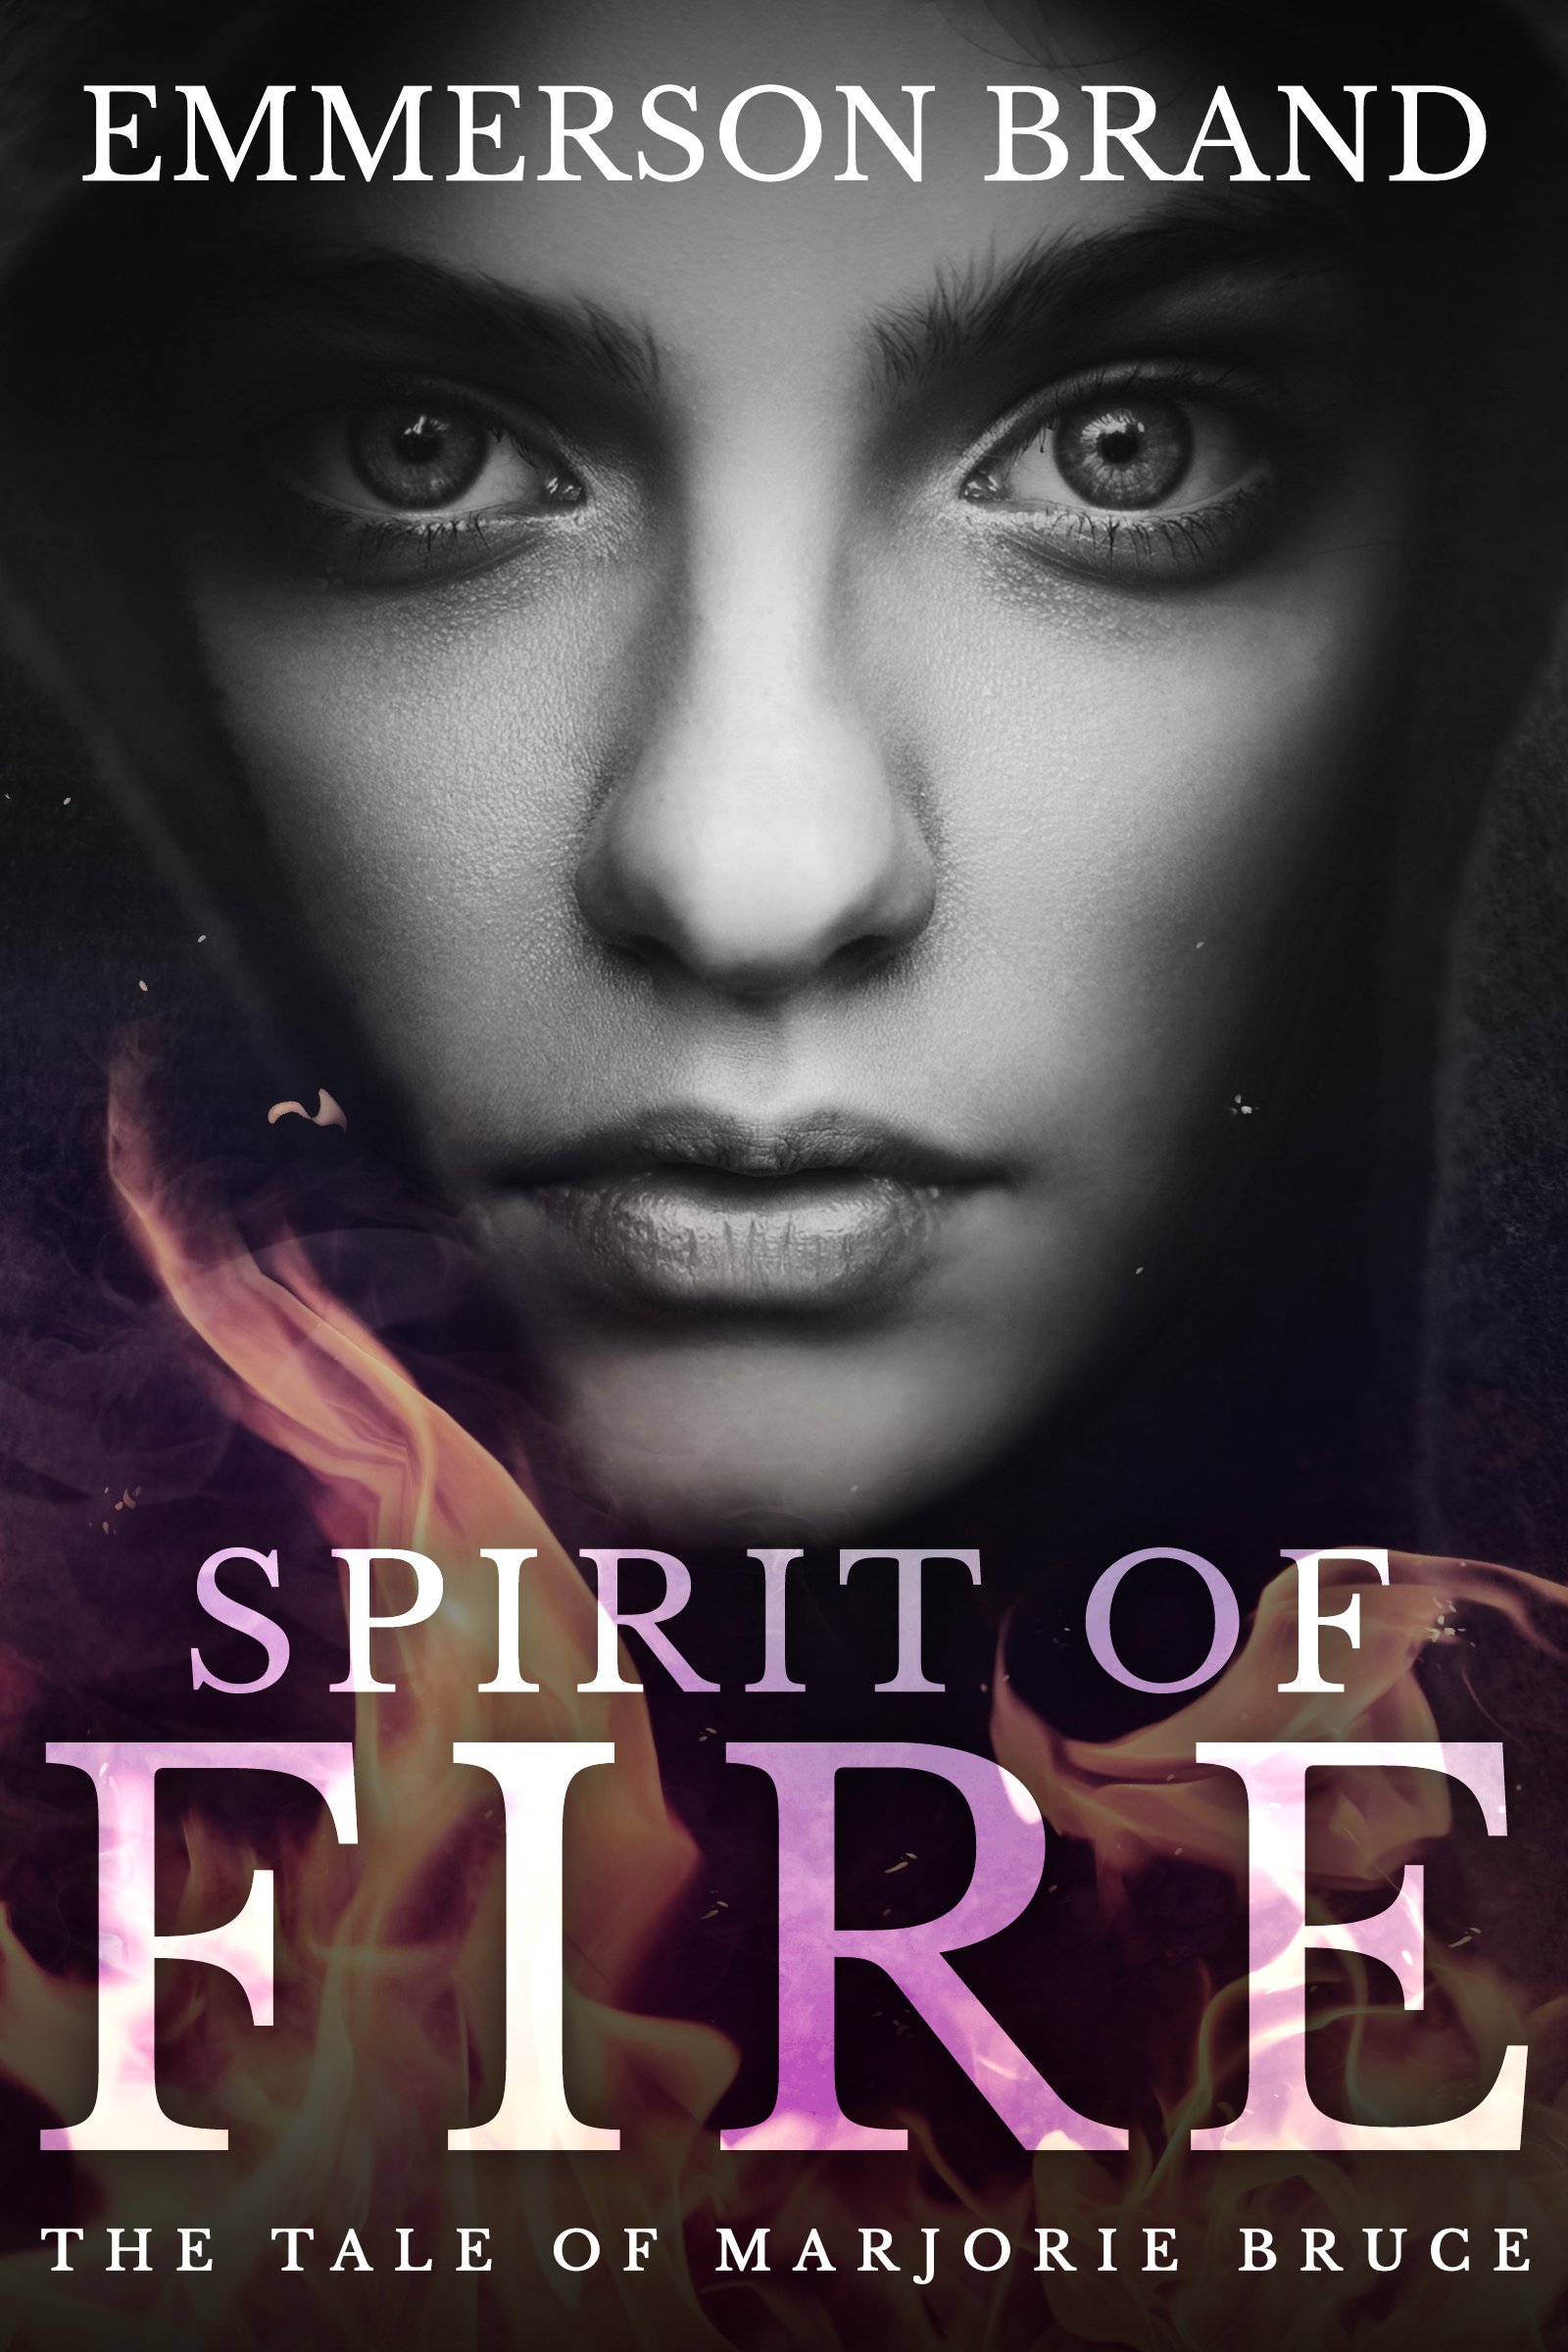 FREE: Spirit of Fire by Emmerson Brand